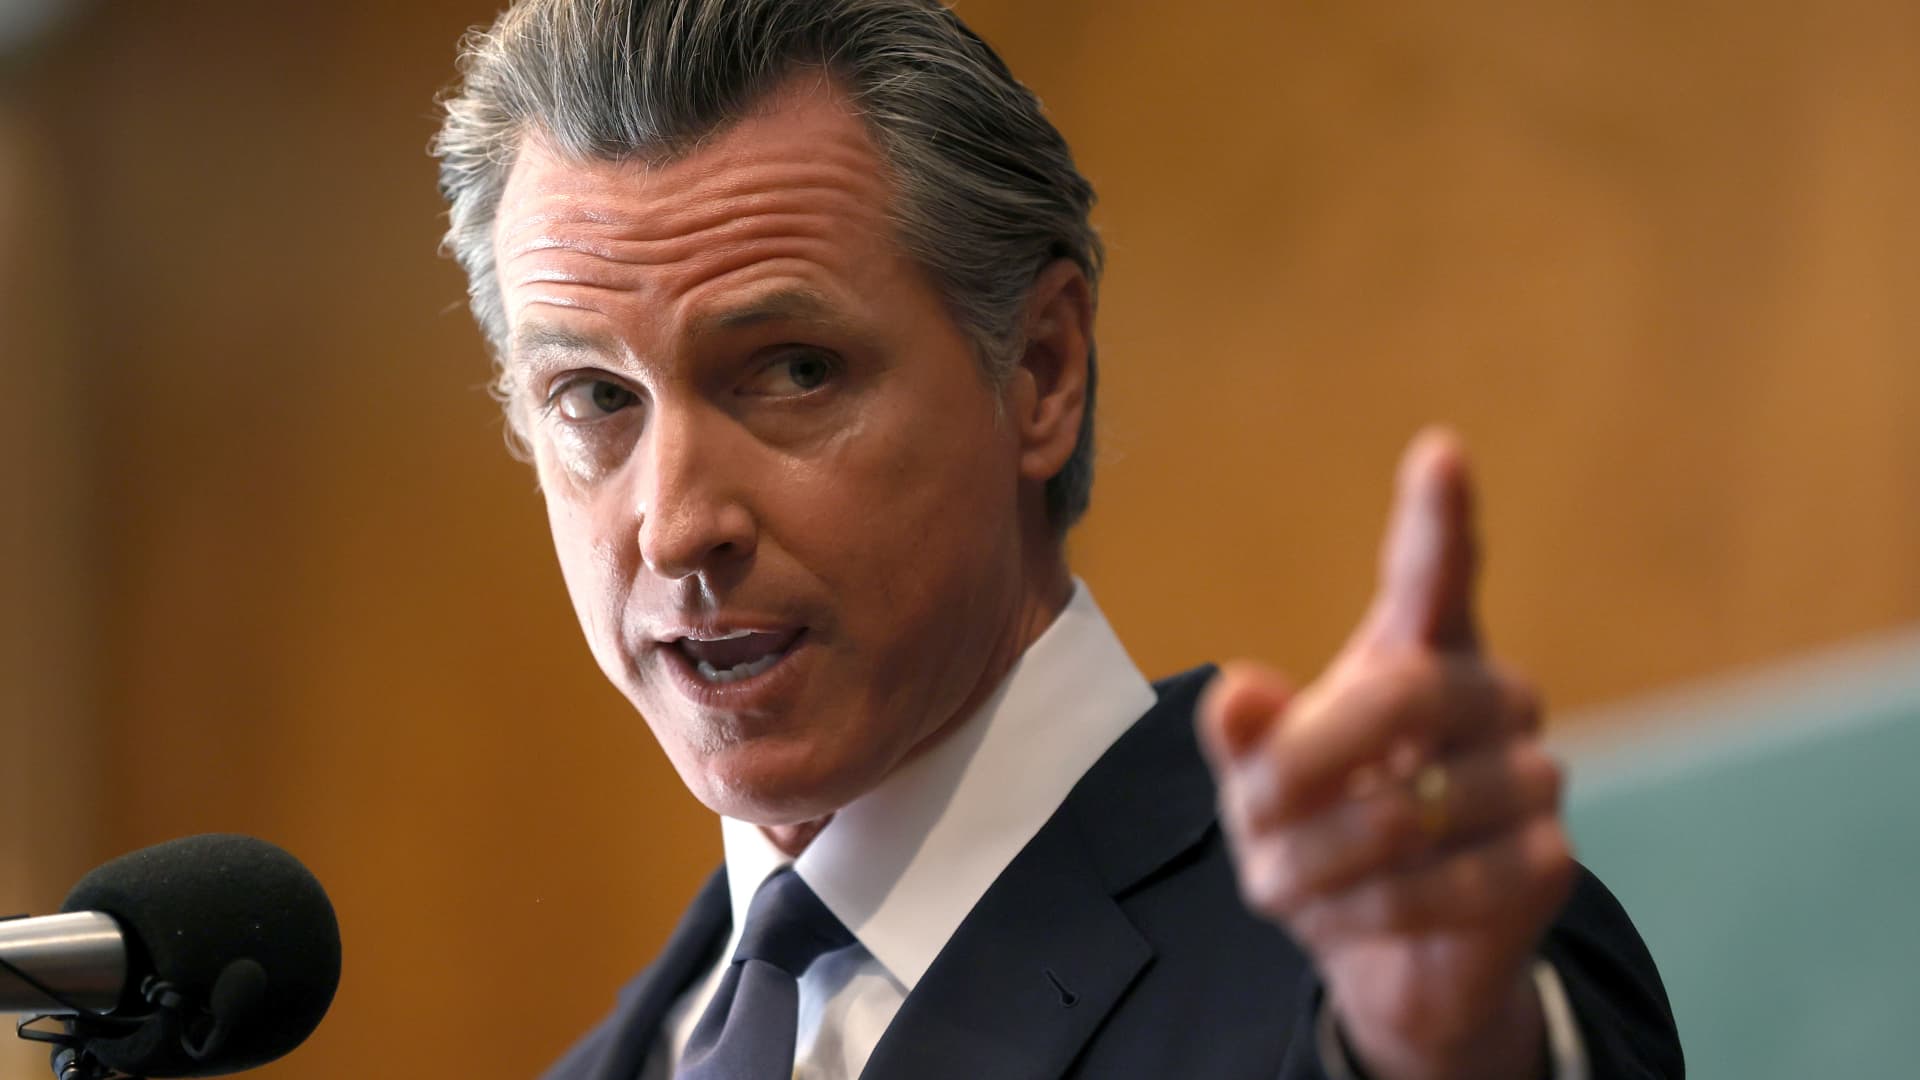 California governor says state won’t do business with Walgreens over position on abortion pill